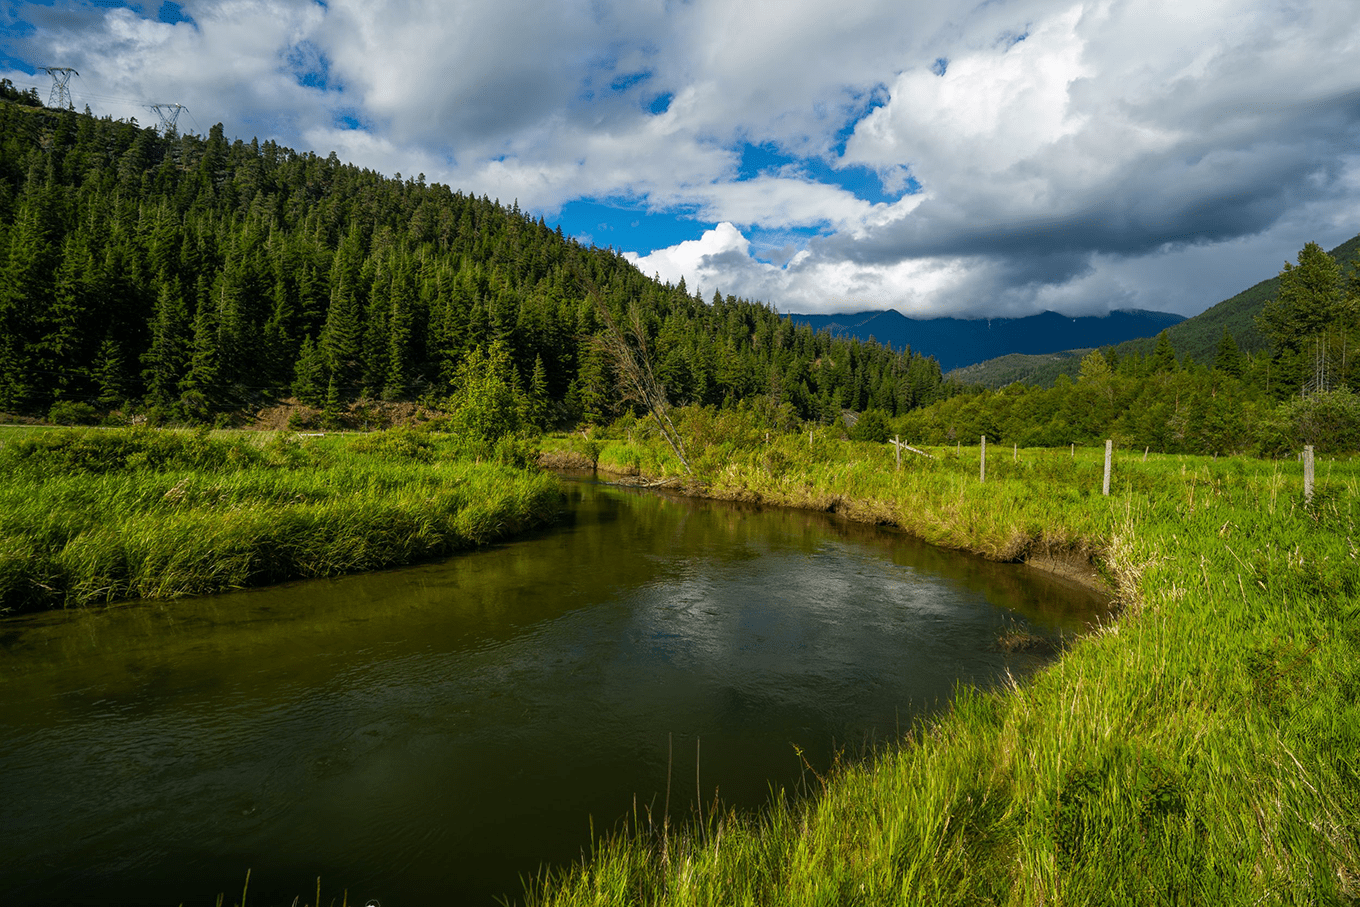 Op/Ed: Conserving forest, grassland and wetland ecosystems in British Columbia has global impact